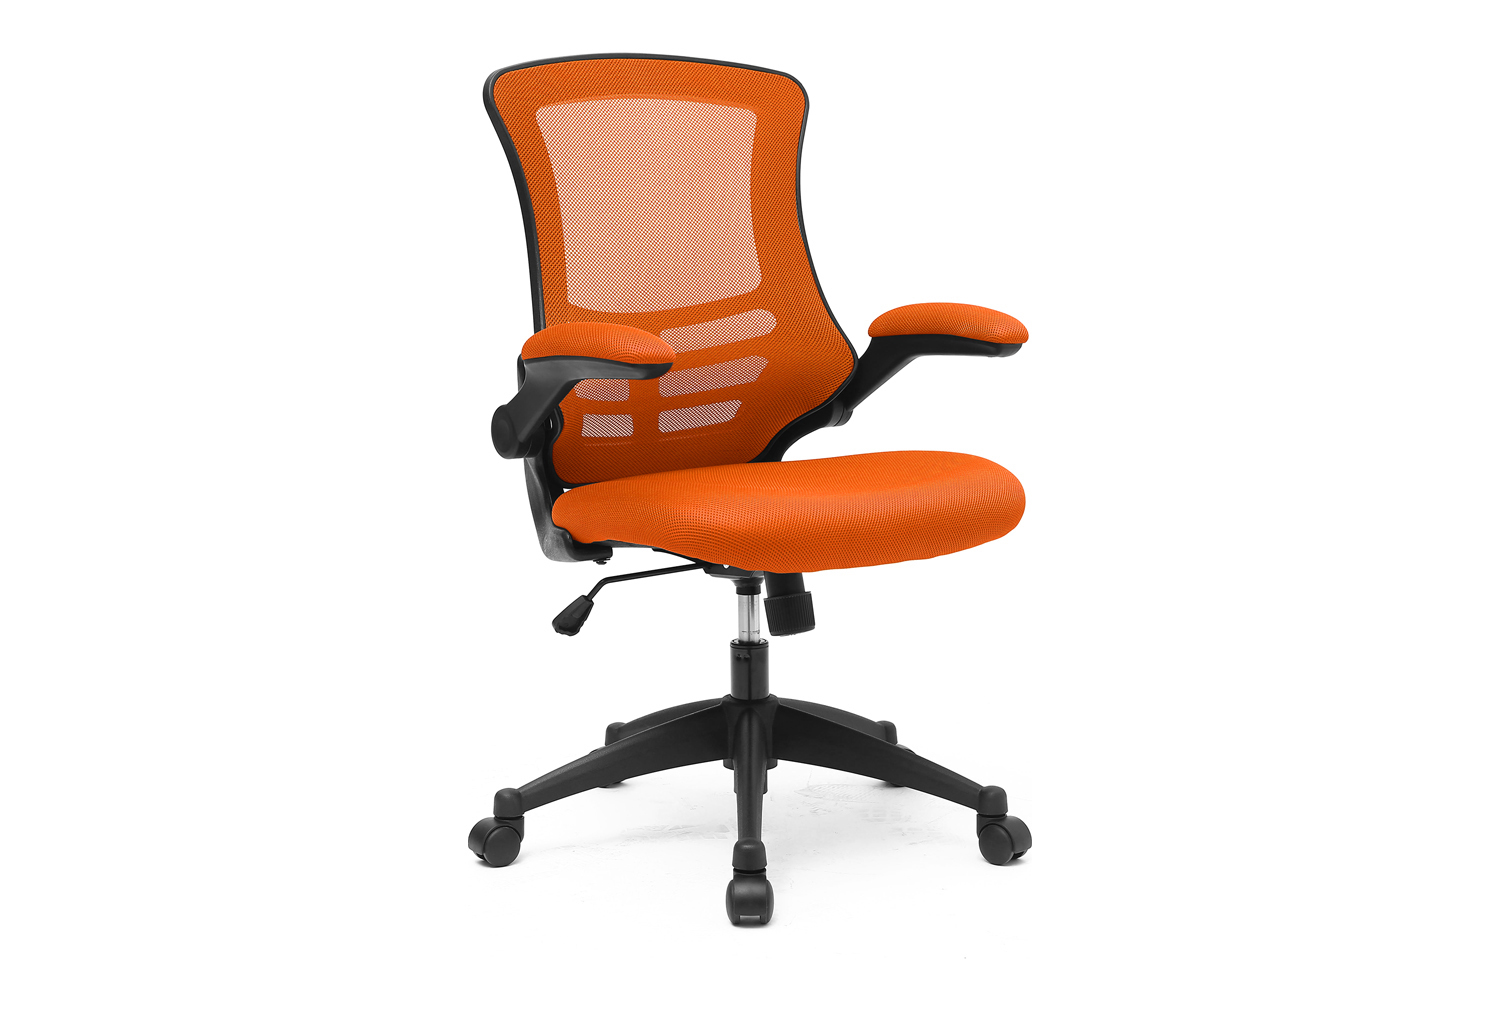 Moon Mesh Back Operator Office Chair With Black Base (Orange), Fully Installed